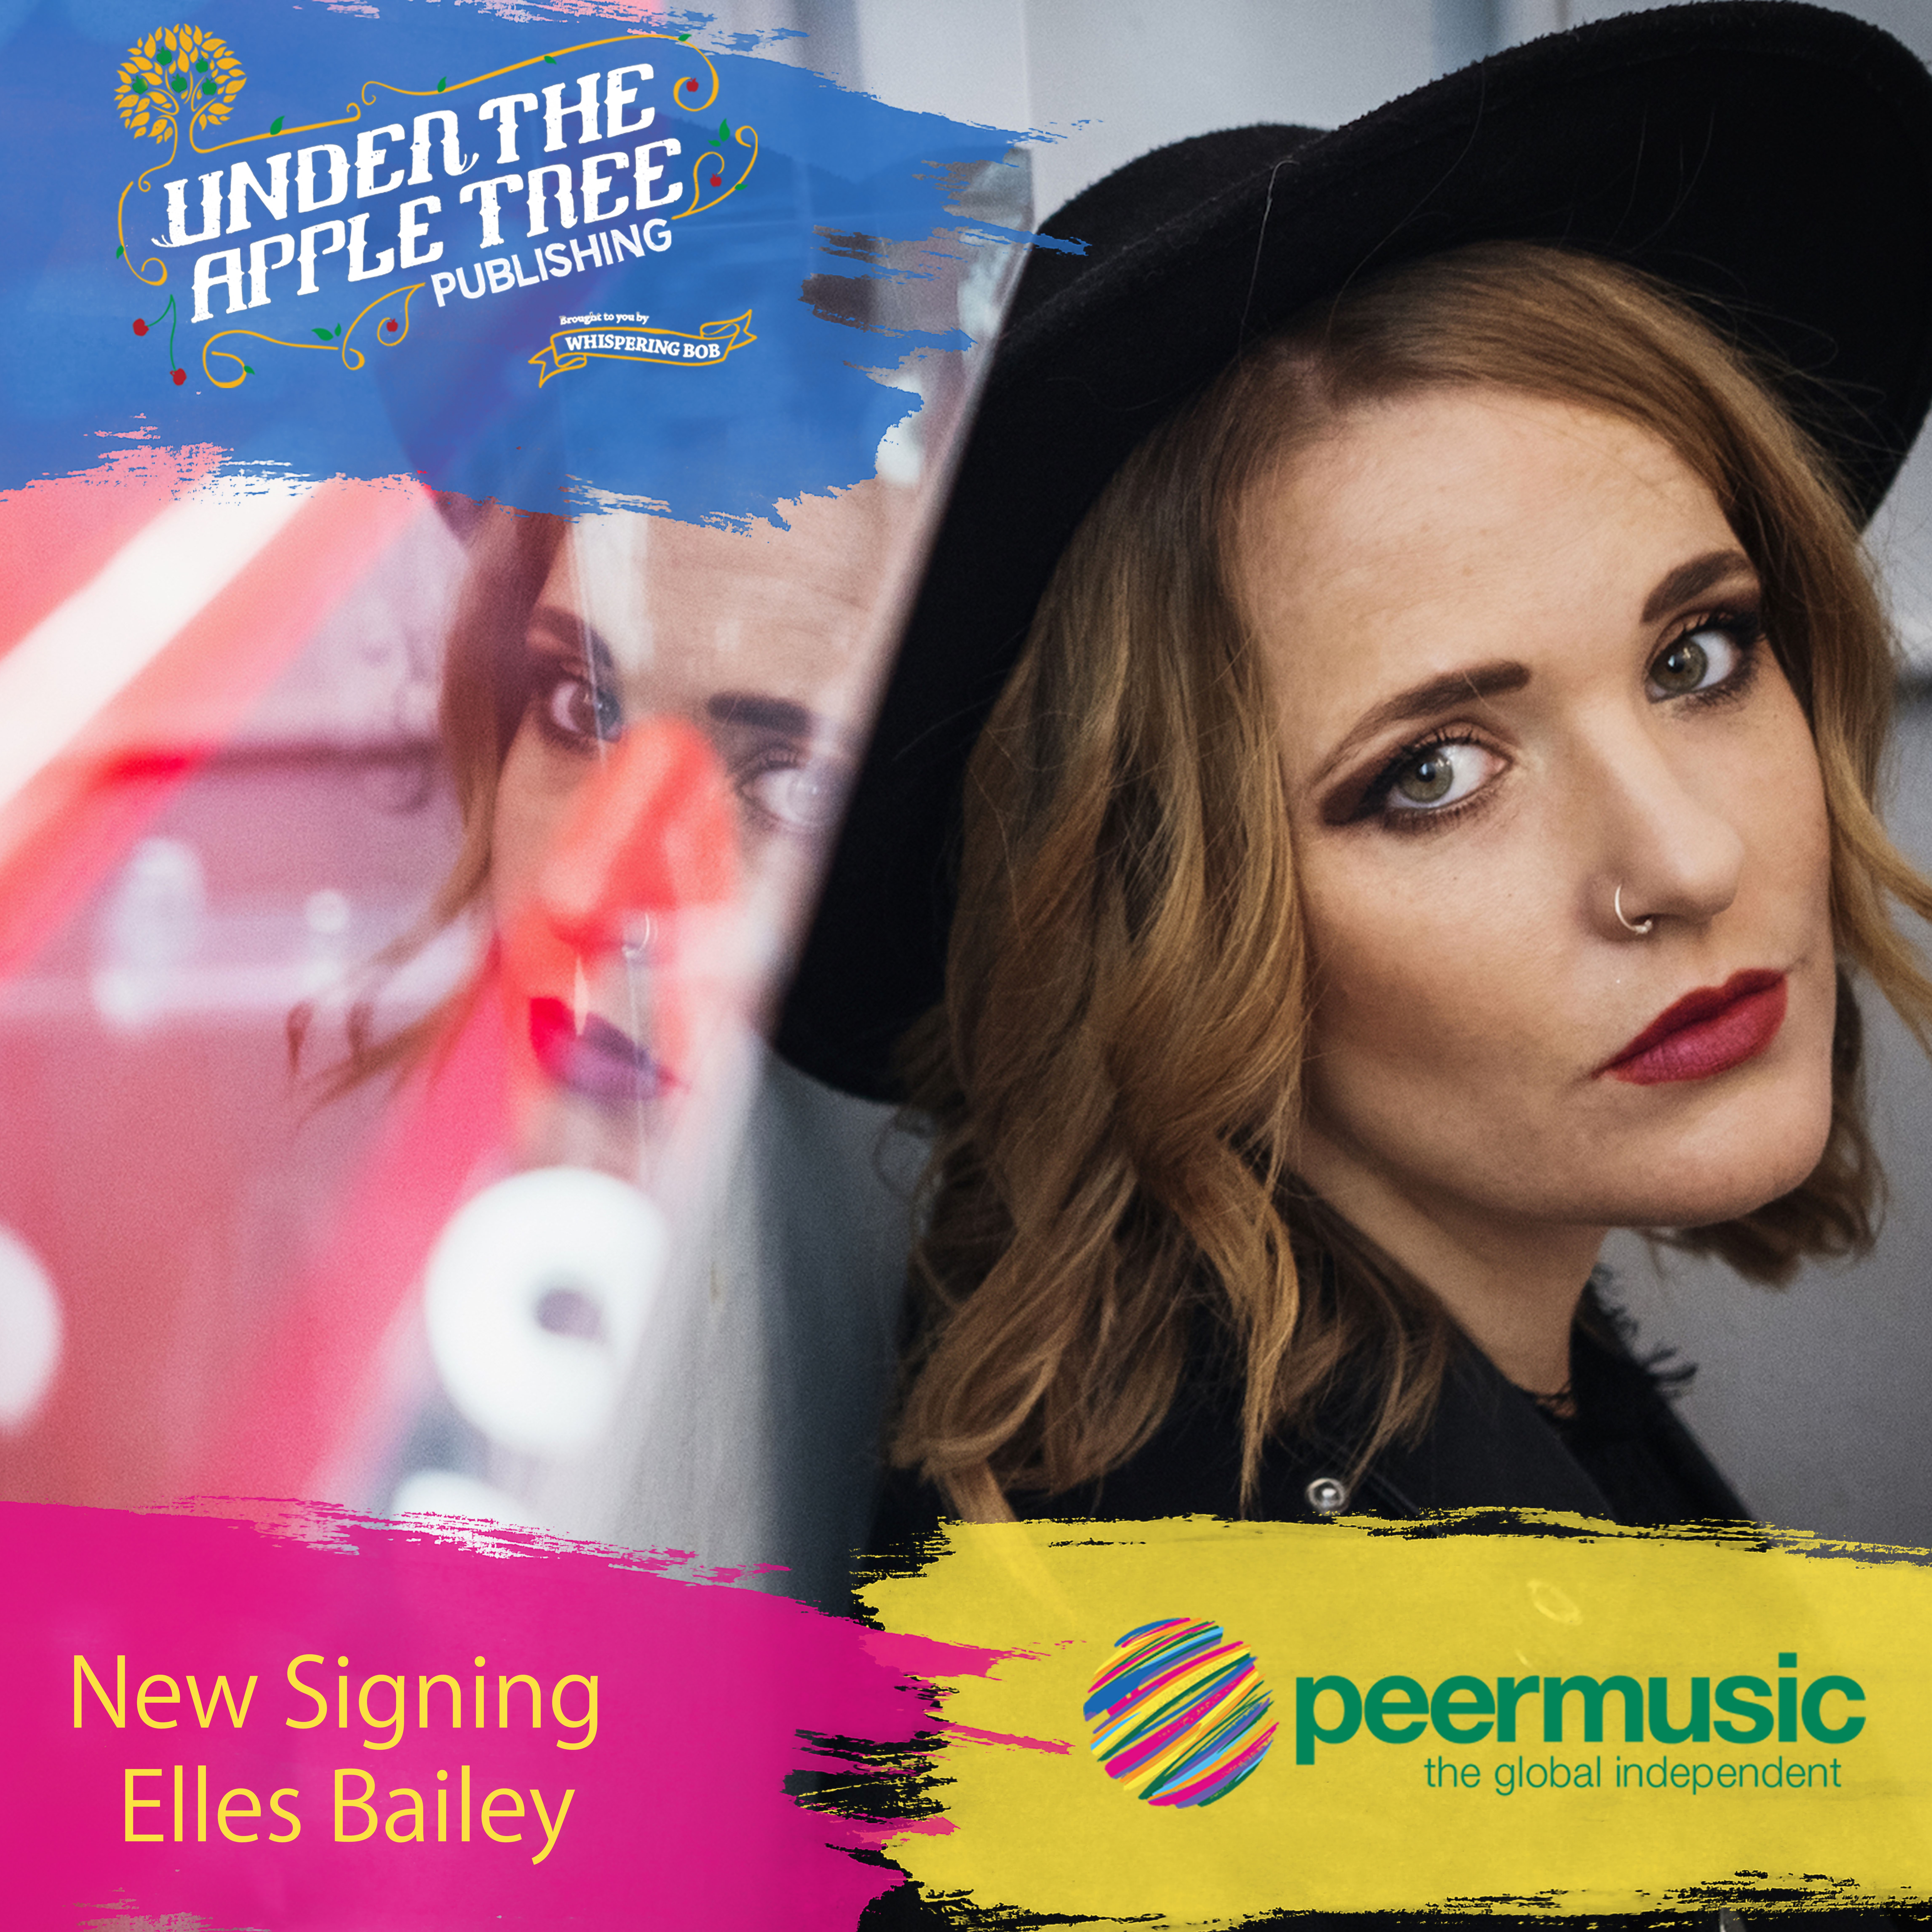 Exciting News from Elles Bailey including festival appearances